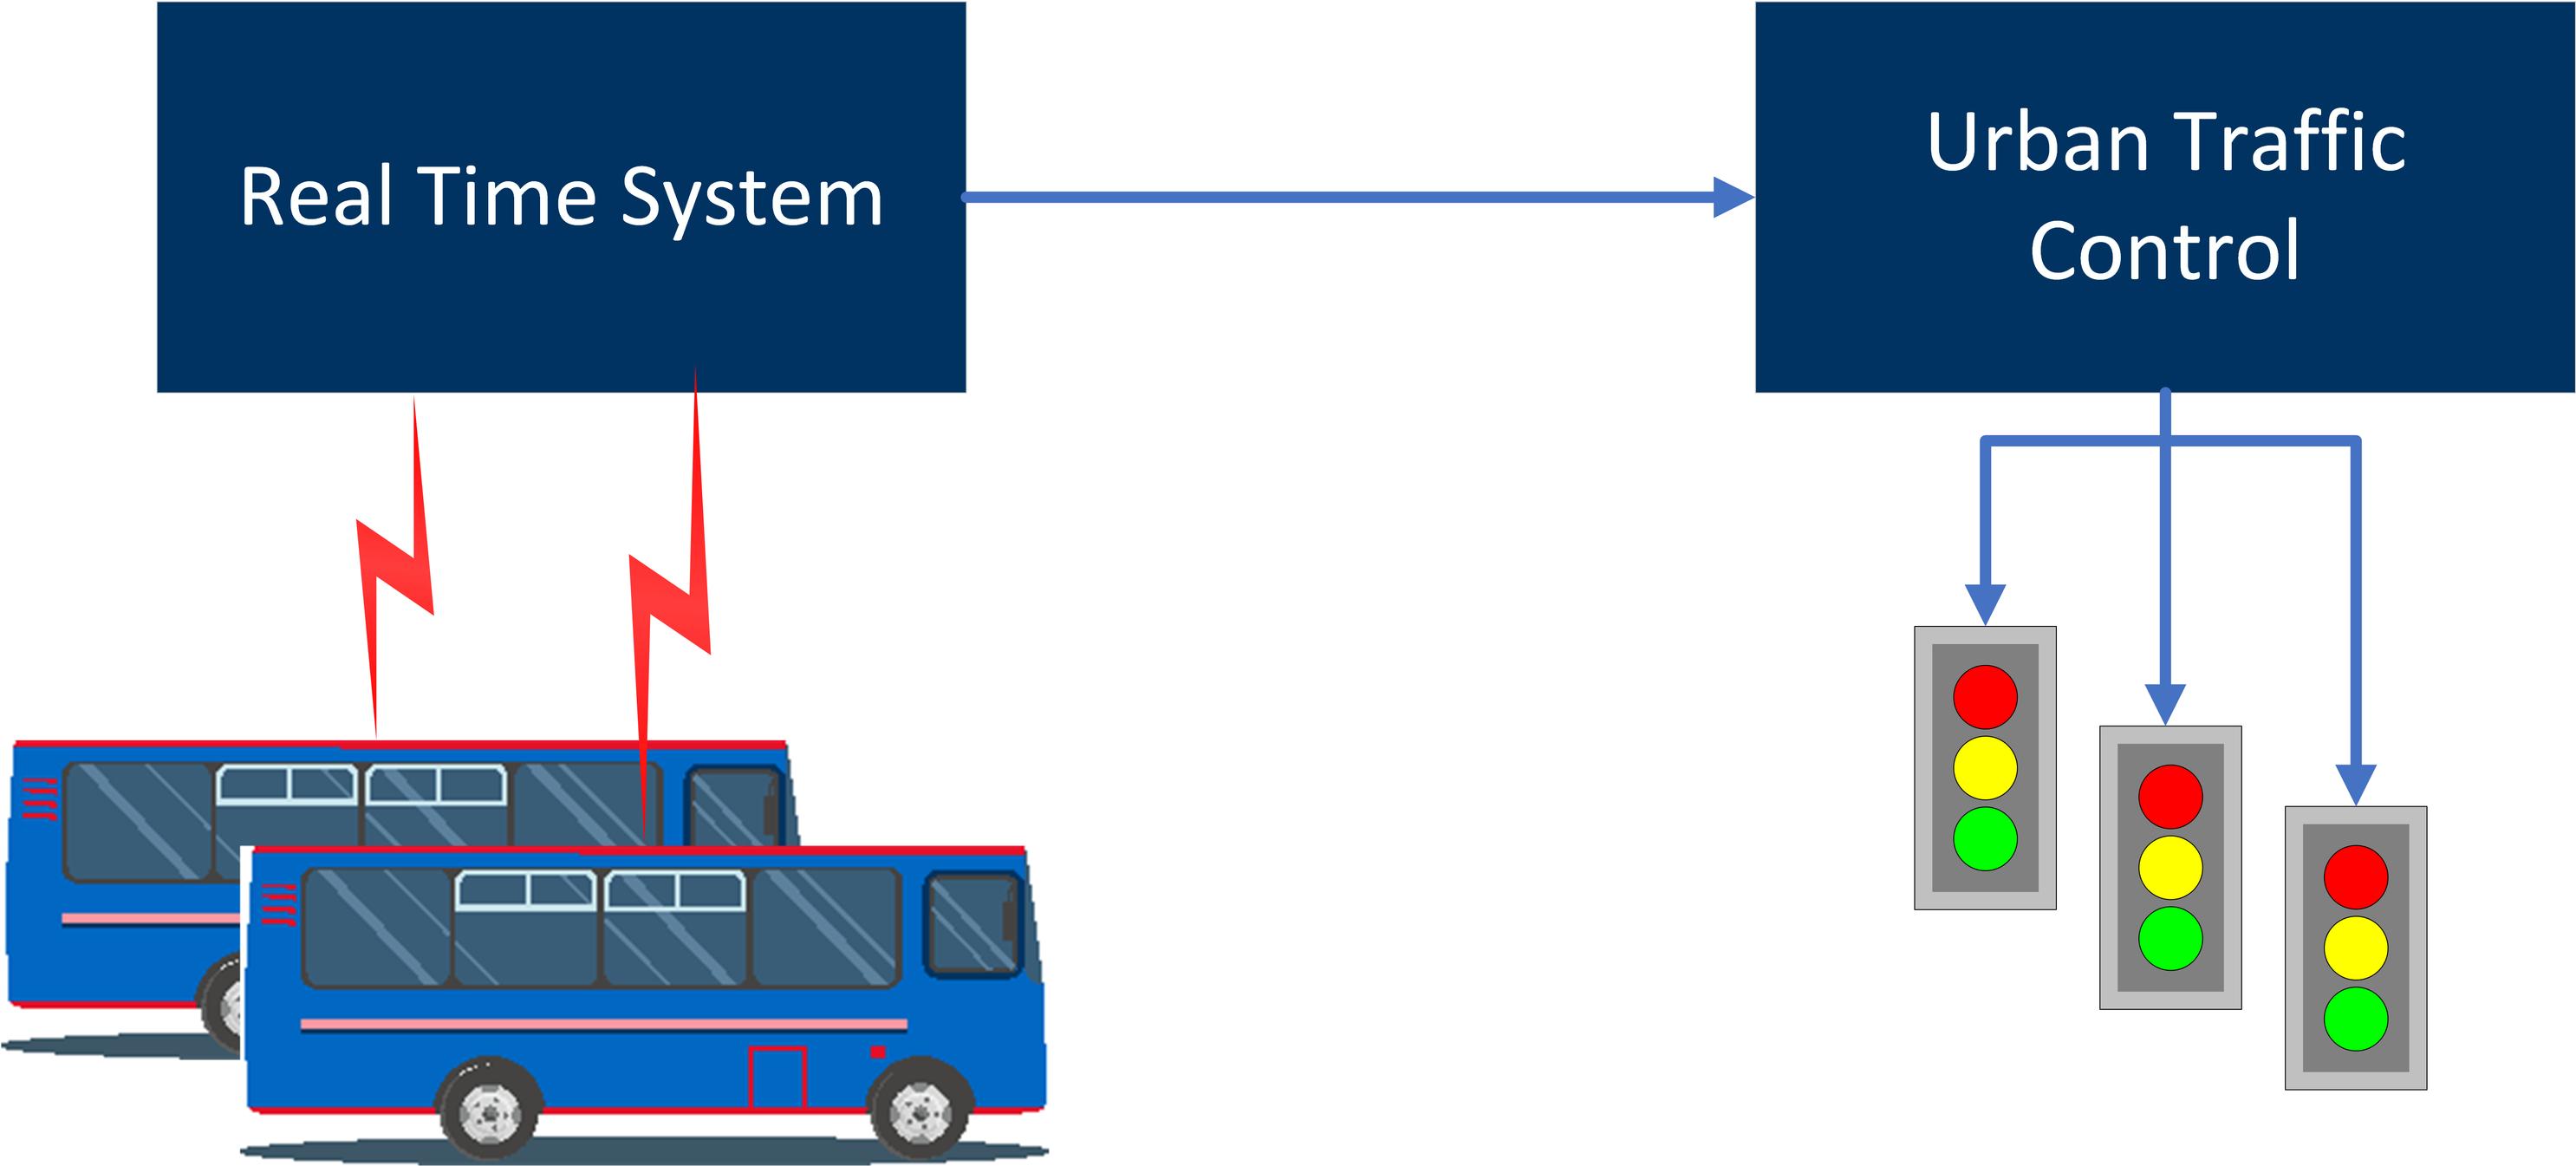 Traffic signals are linked to an urban traffic control system, which decides how much priority to give a bus